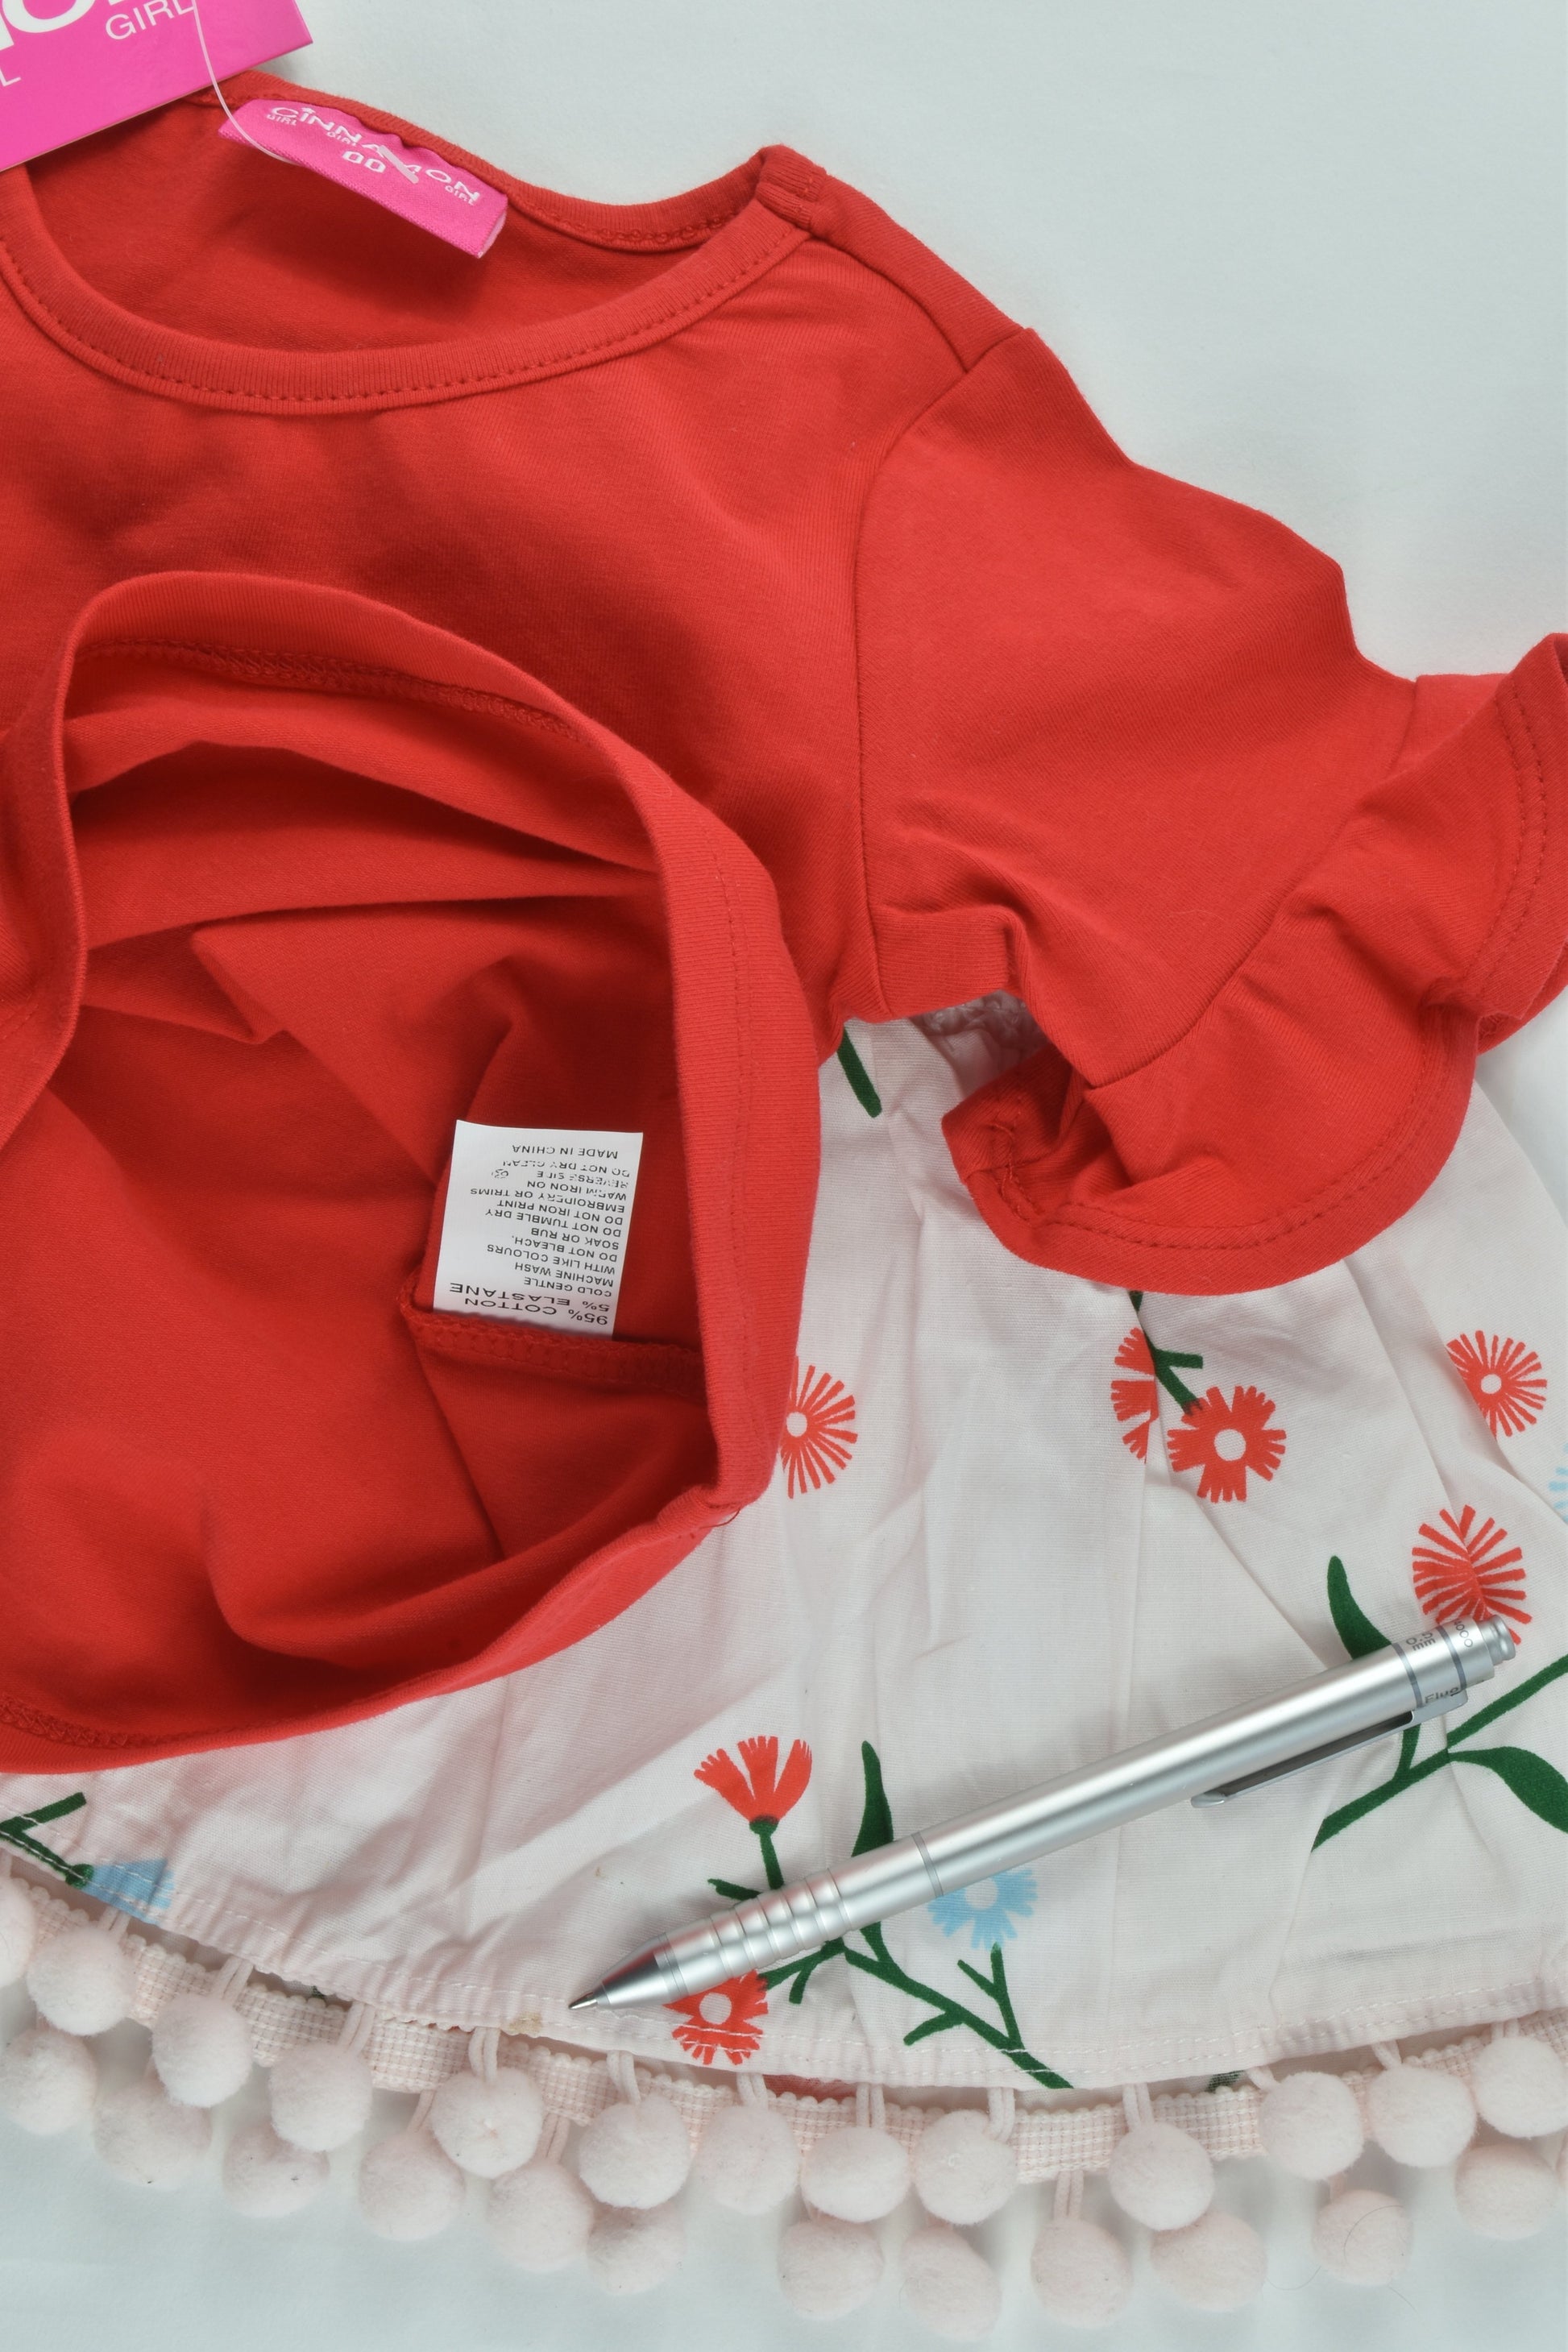 NEW Cinnamon Girl Size 00 Red T-shirt and Floral Lined Skirt